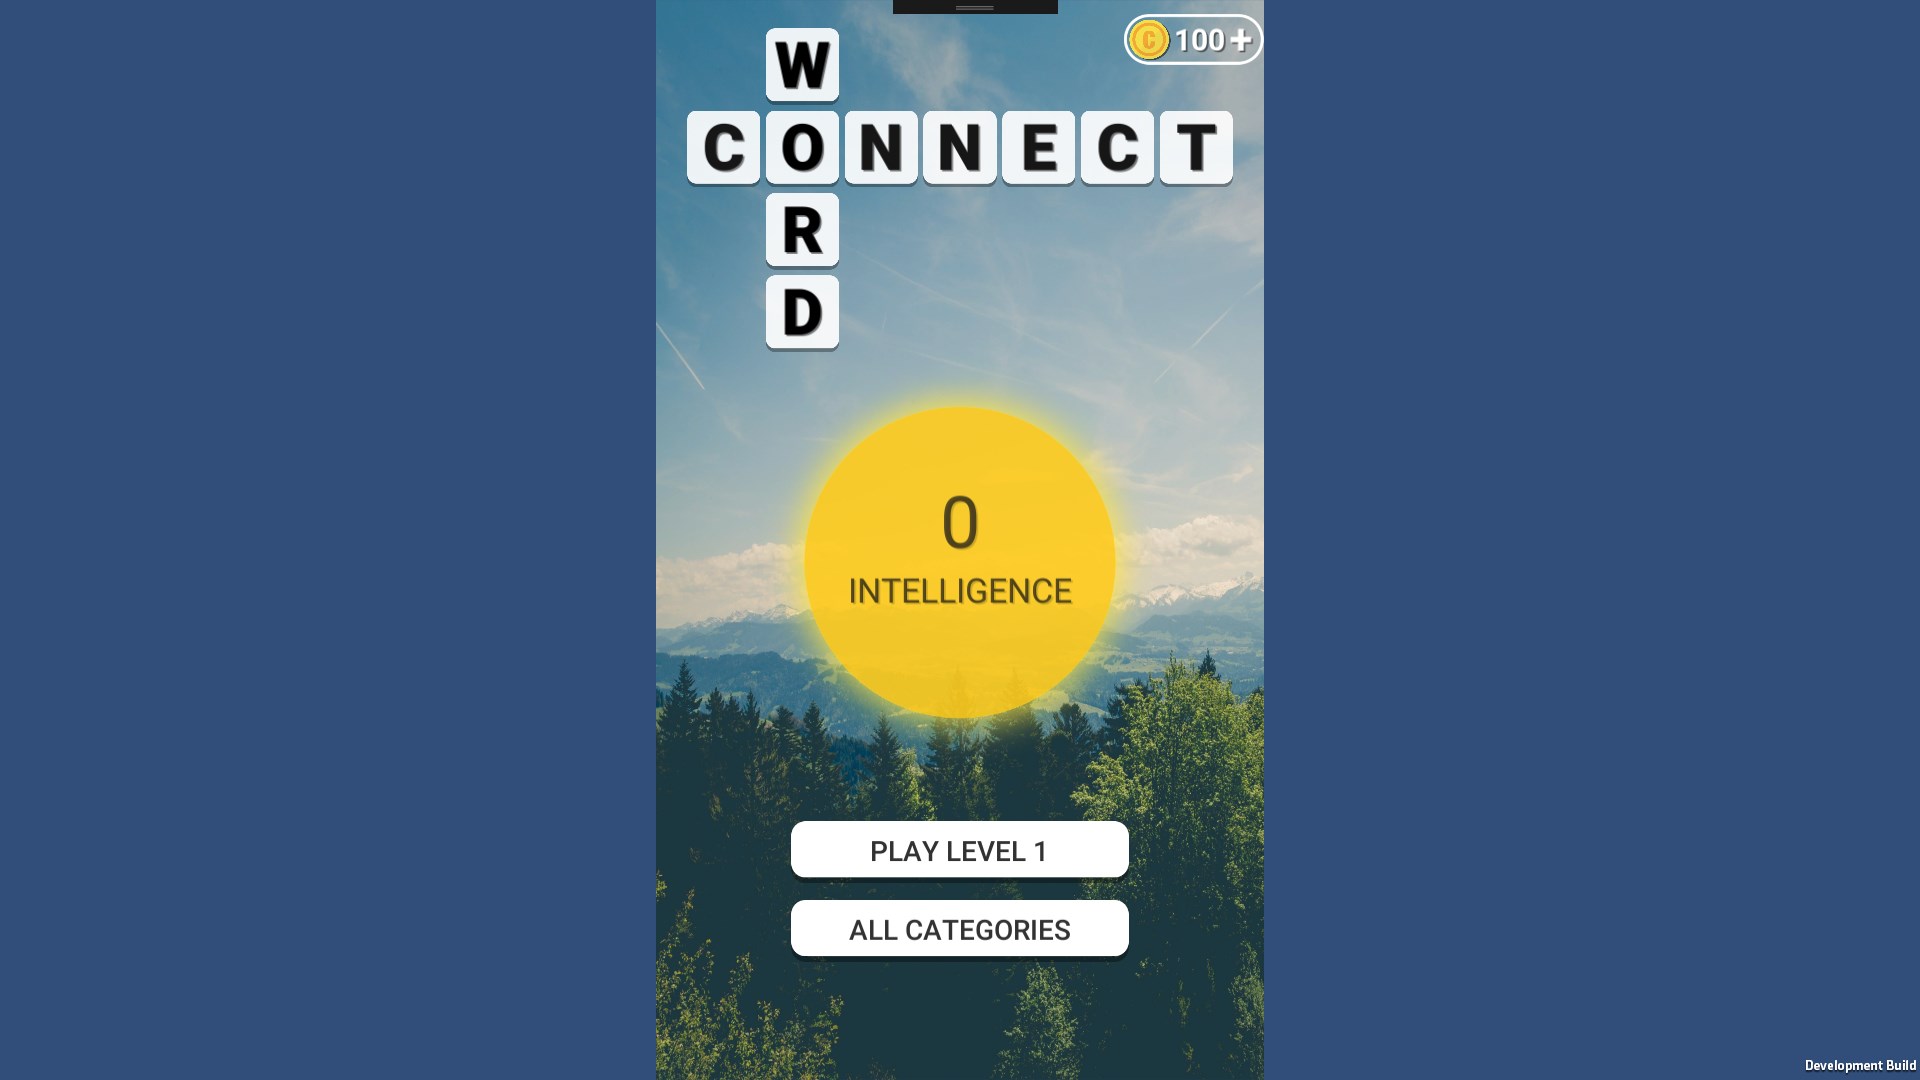 12 Free Offline Word Games to Play Anywhere